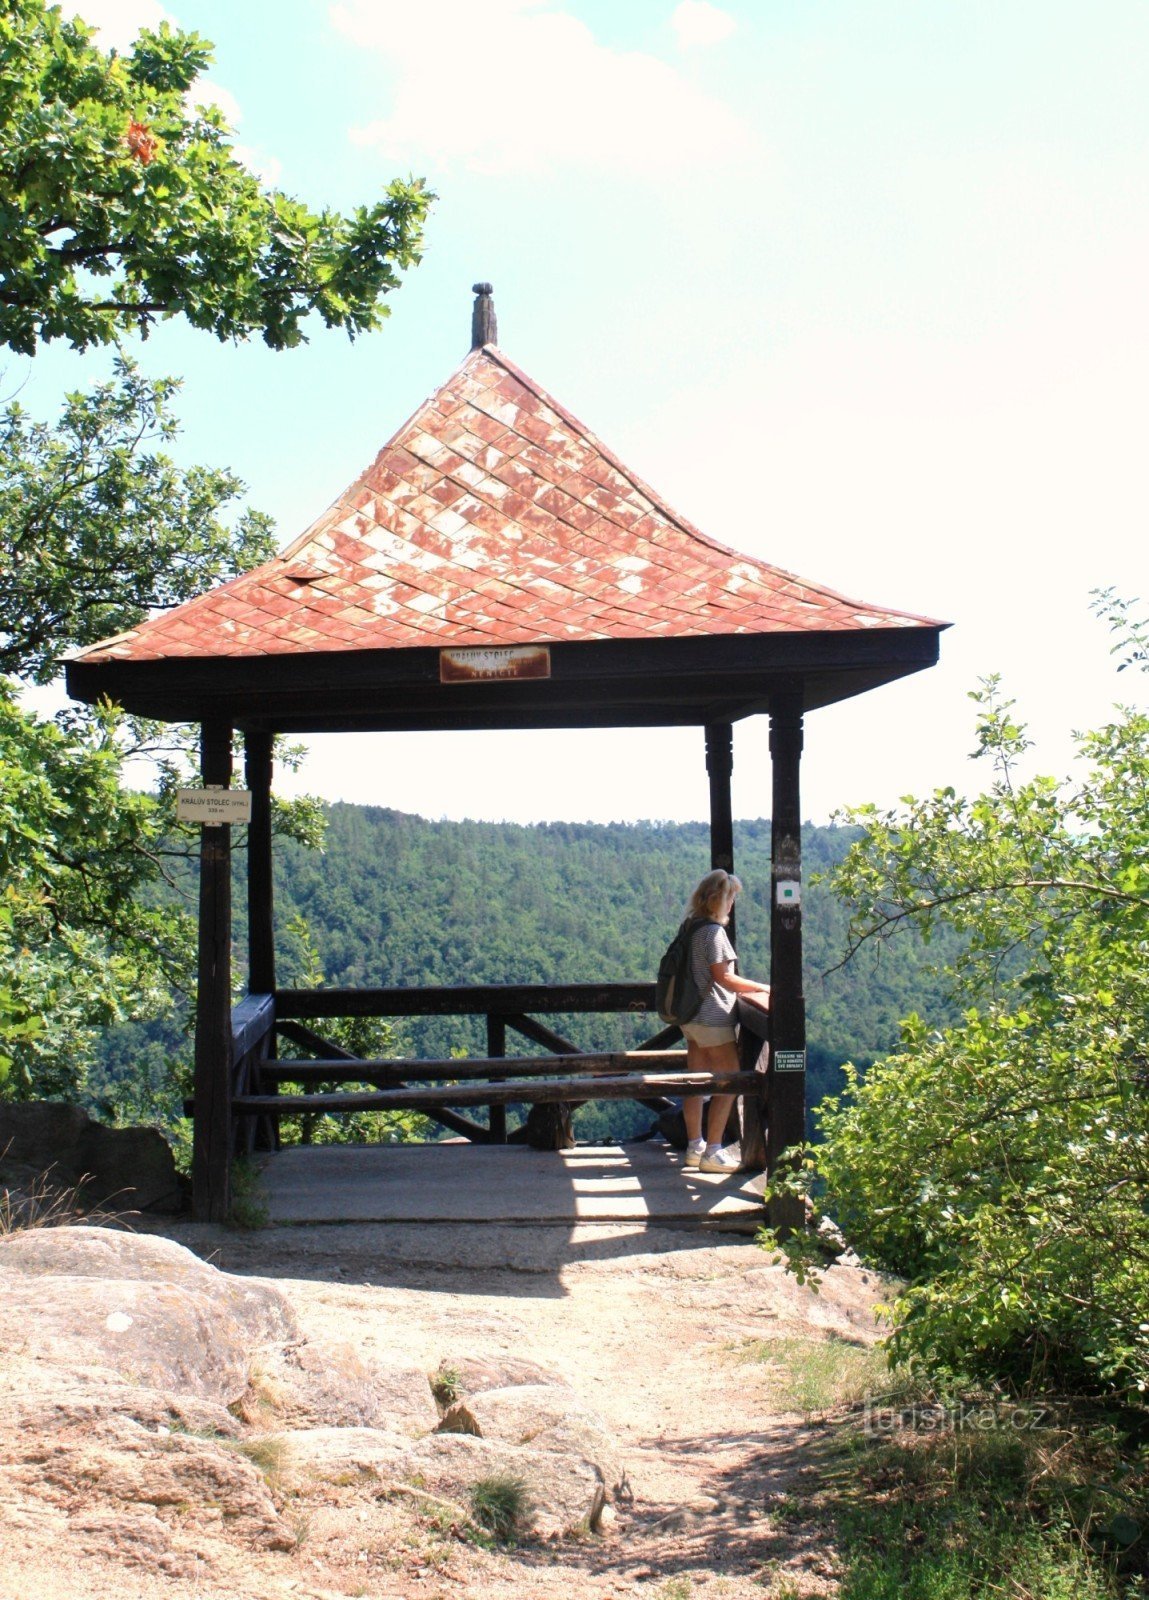 King's chair - observation deck